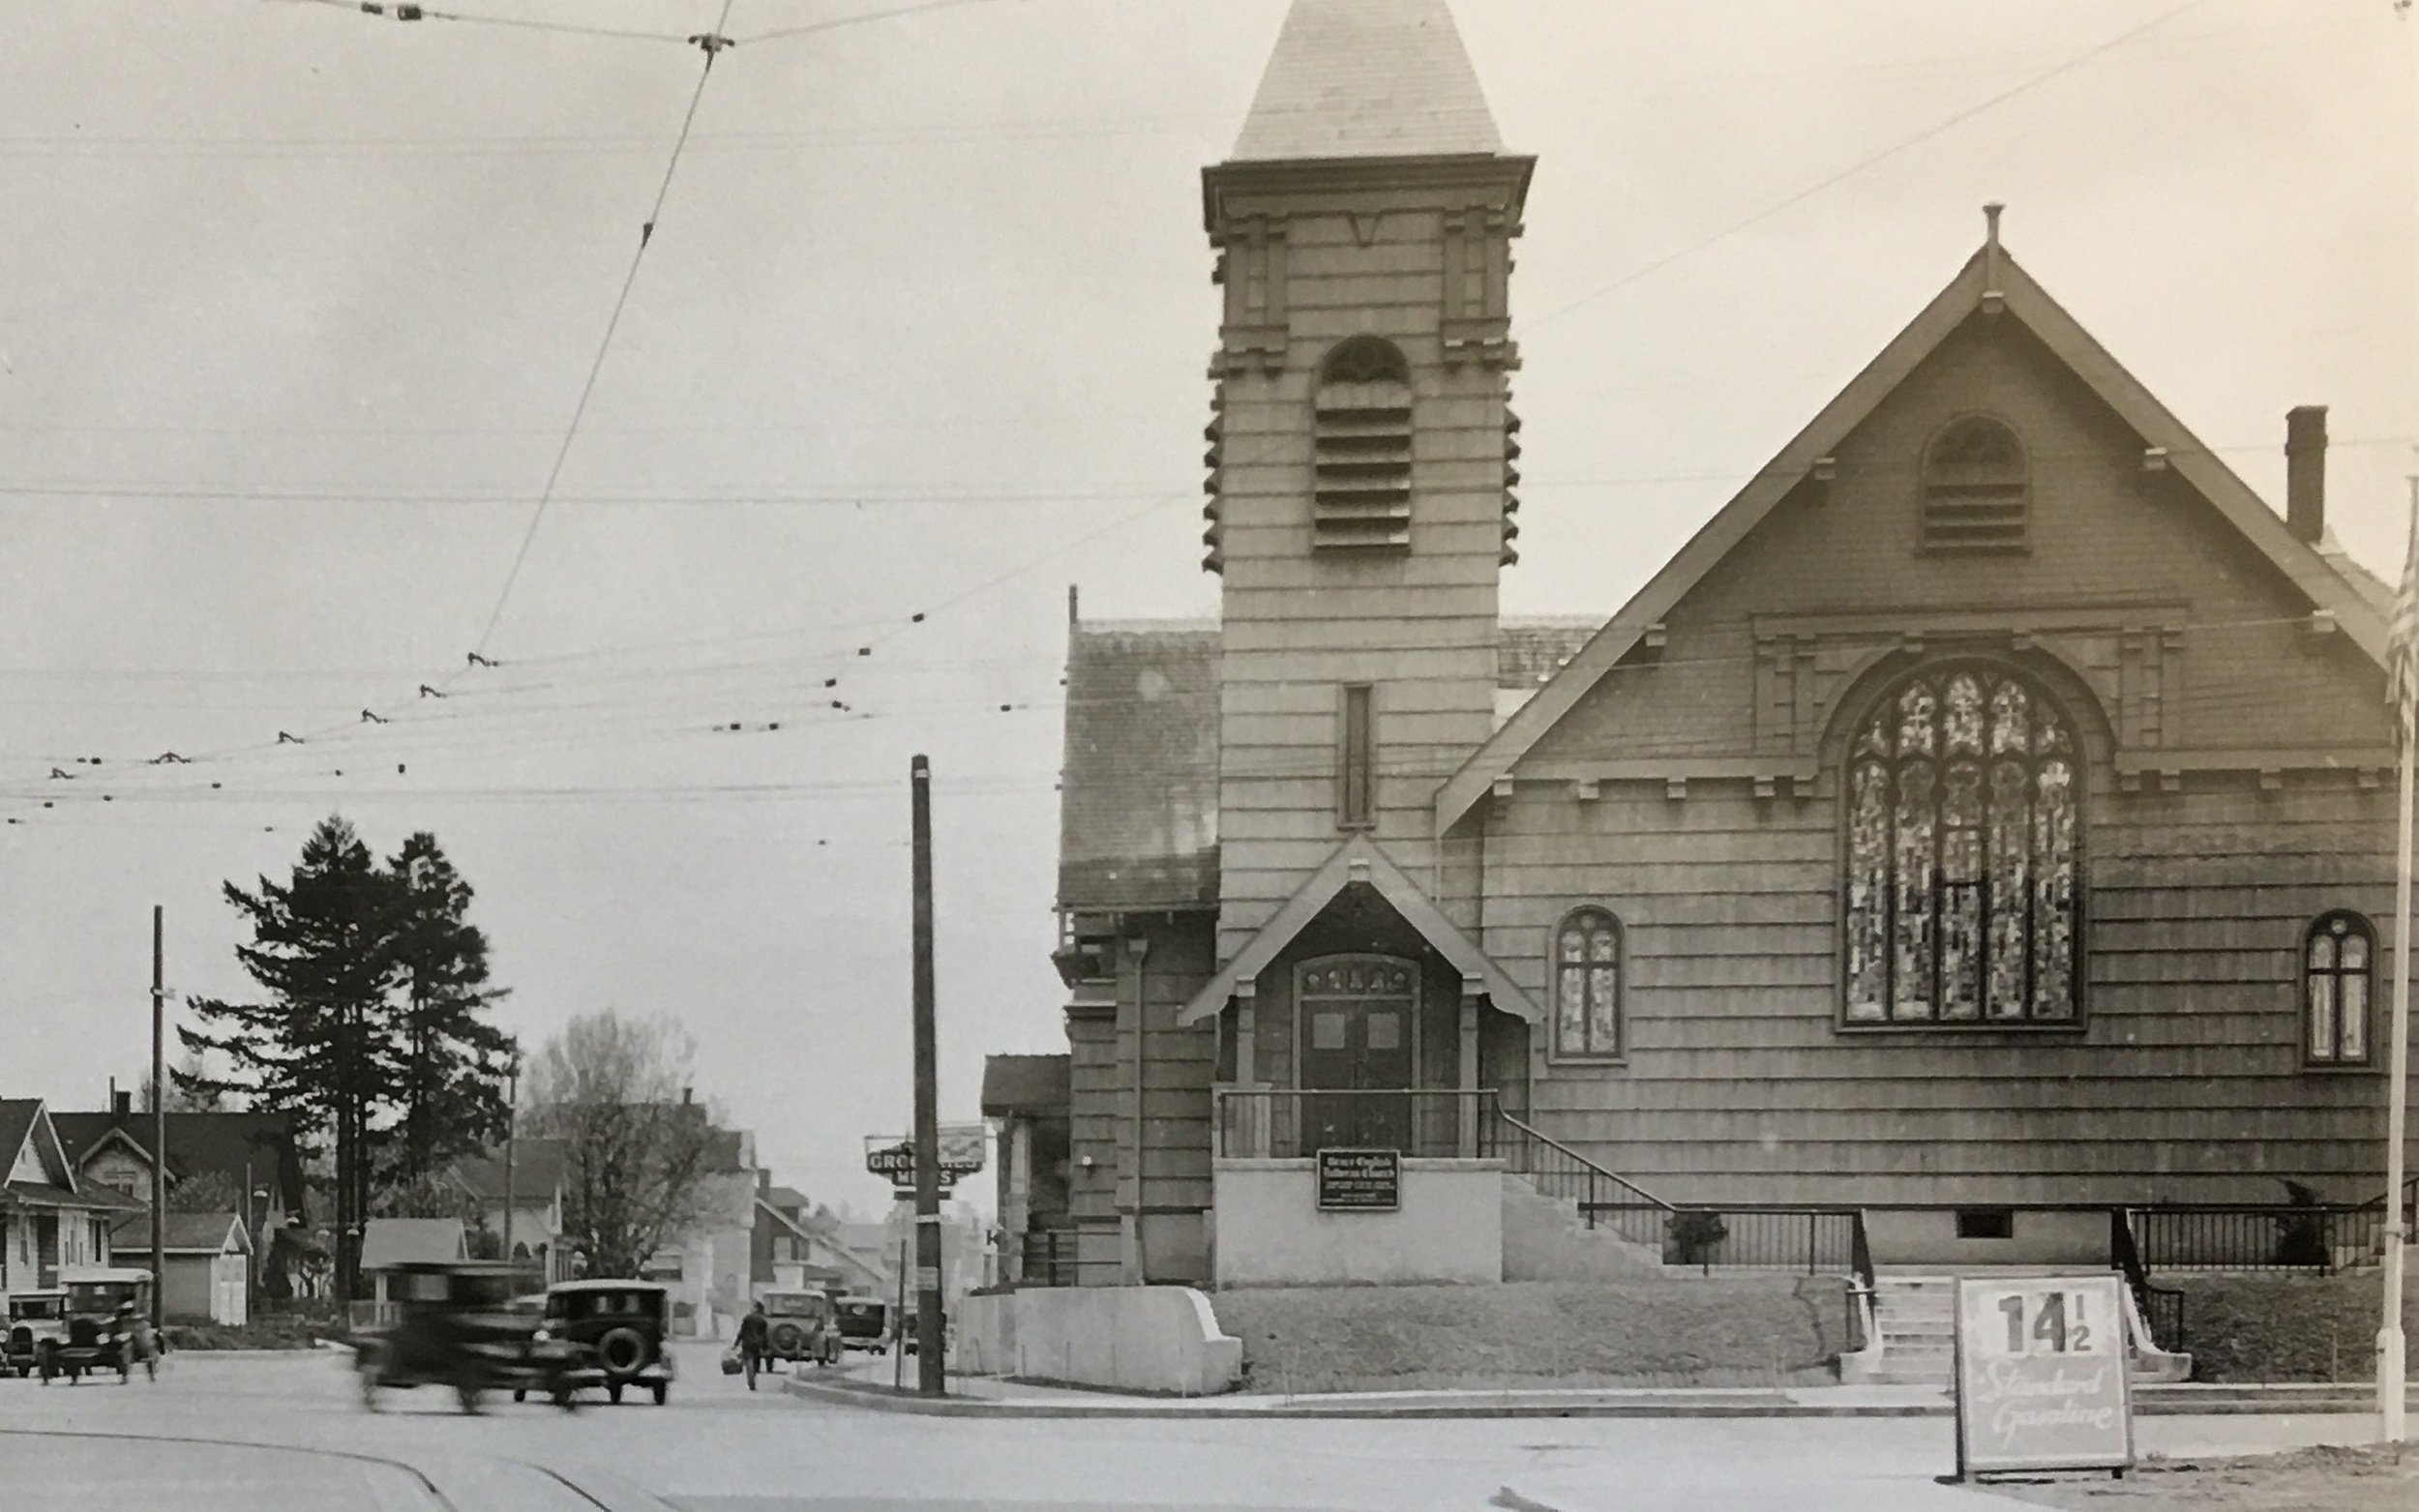  Church on the corner of NE 24th and Broadway, now home to Steeple Jack Brewery.&nbsp; 